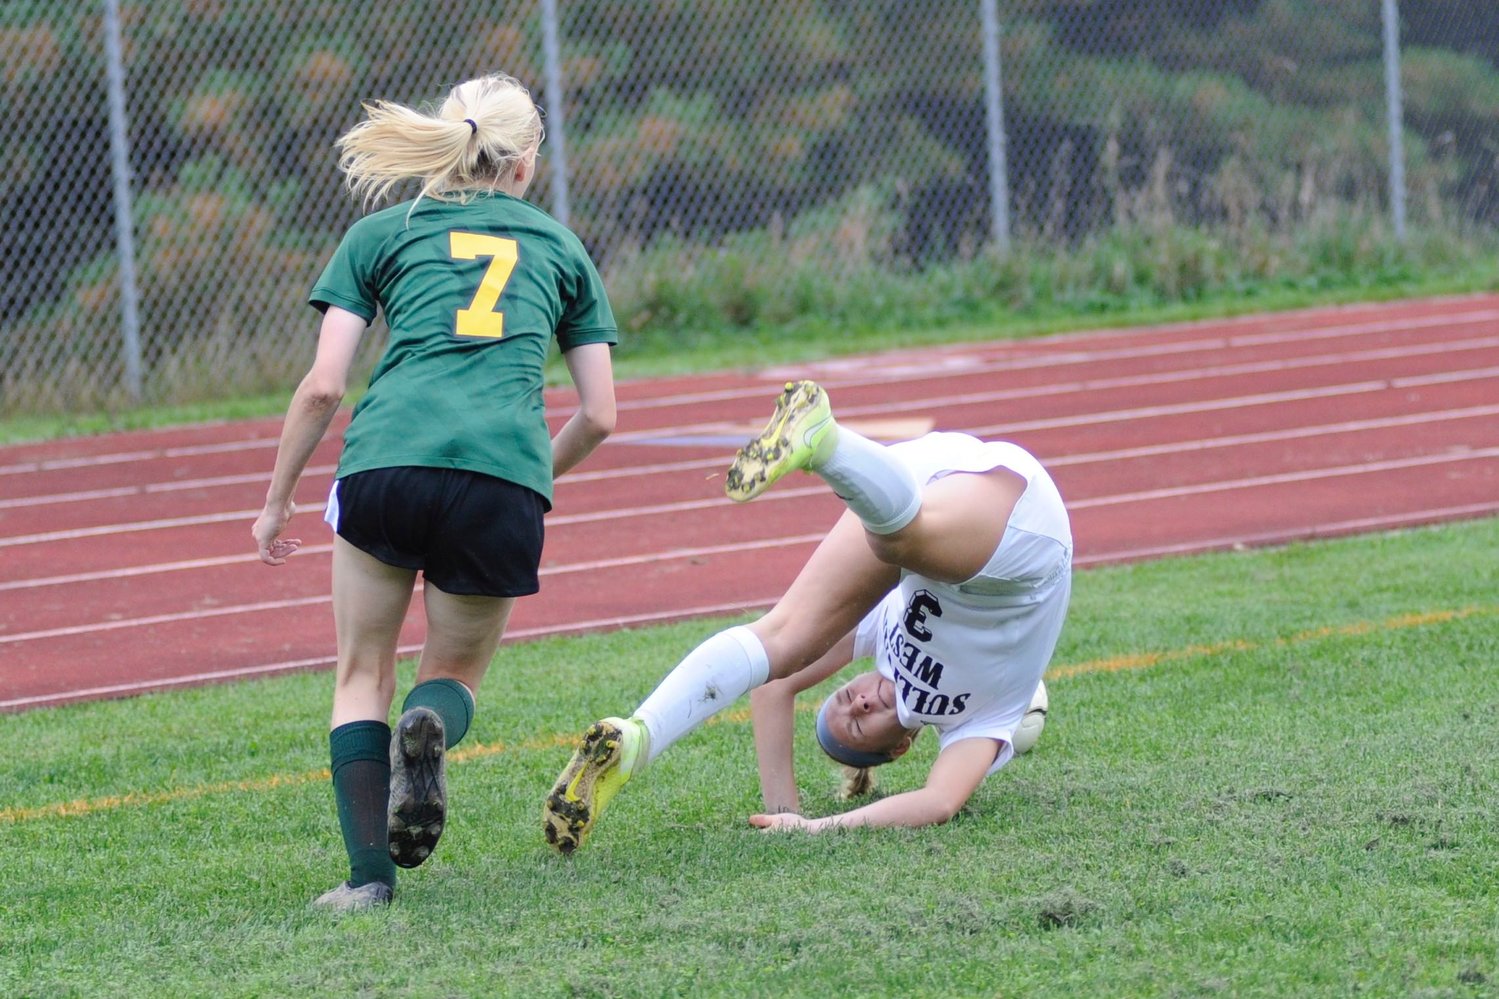 Head over heels about soccer. Sullivan West’s Abby Parucki takes a tumble going after the ball, as Eldred’s Jada Reed closes in on the action...